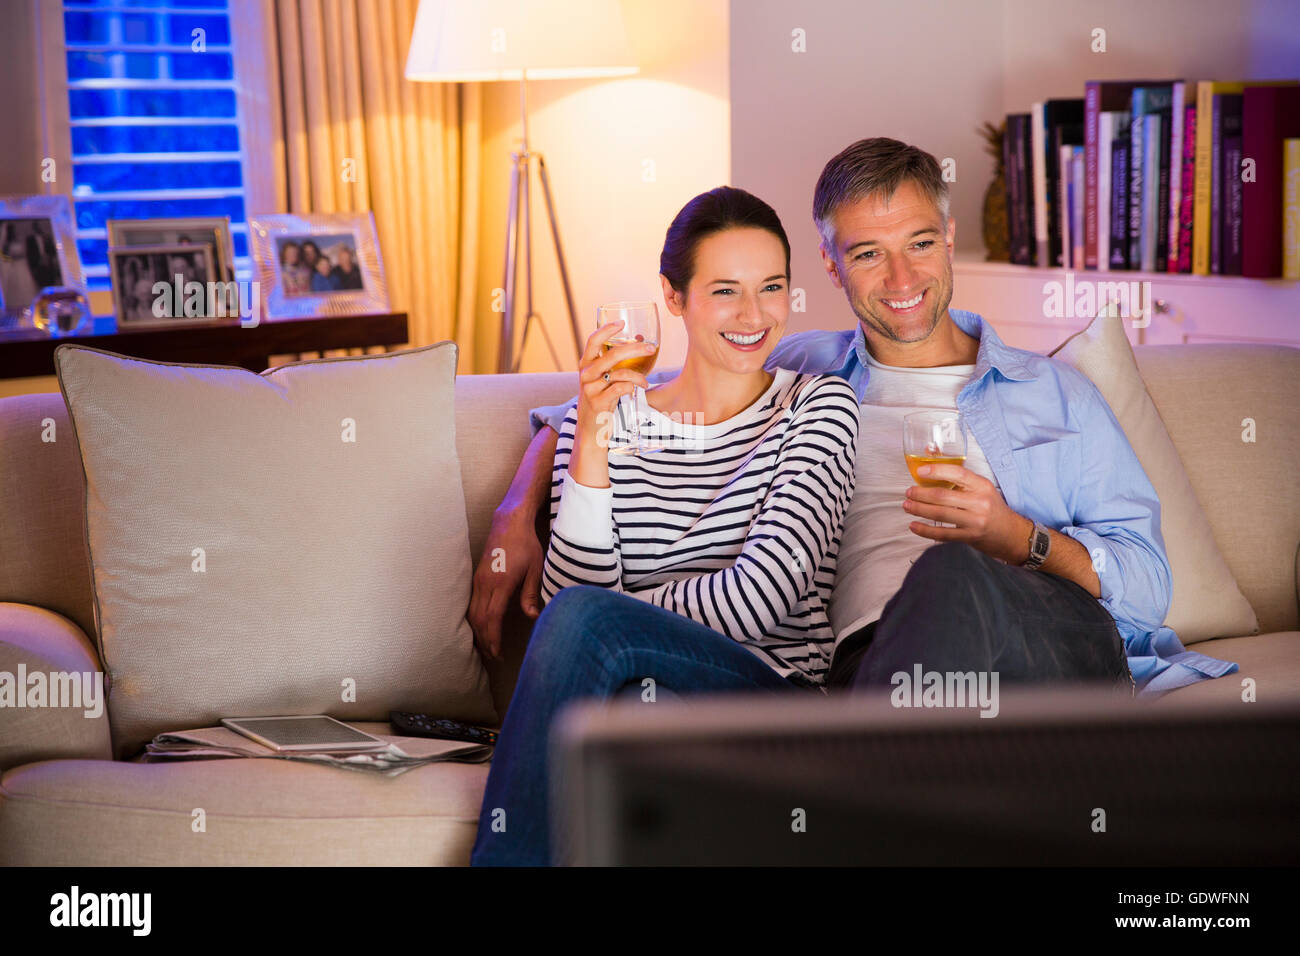 Couple drinking wine and watching TV in living room Stock Photo